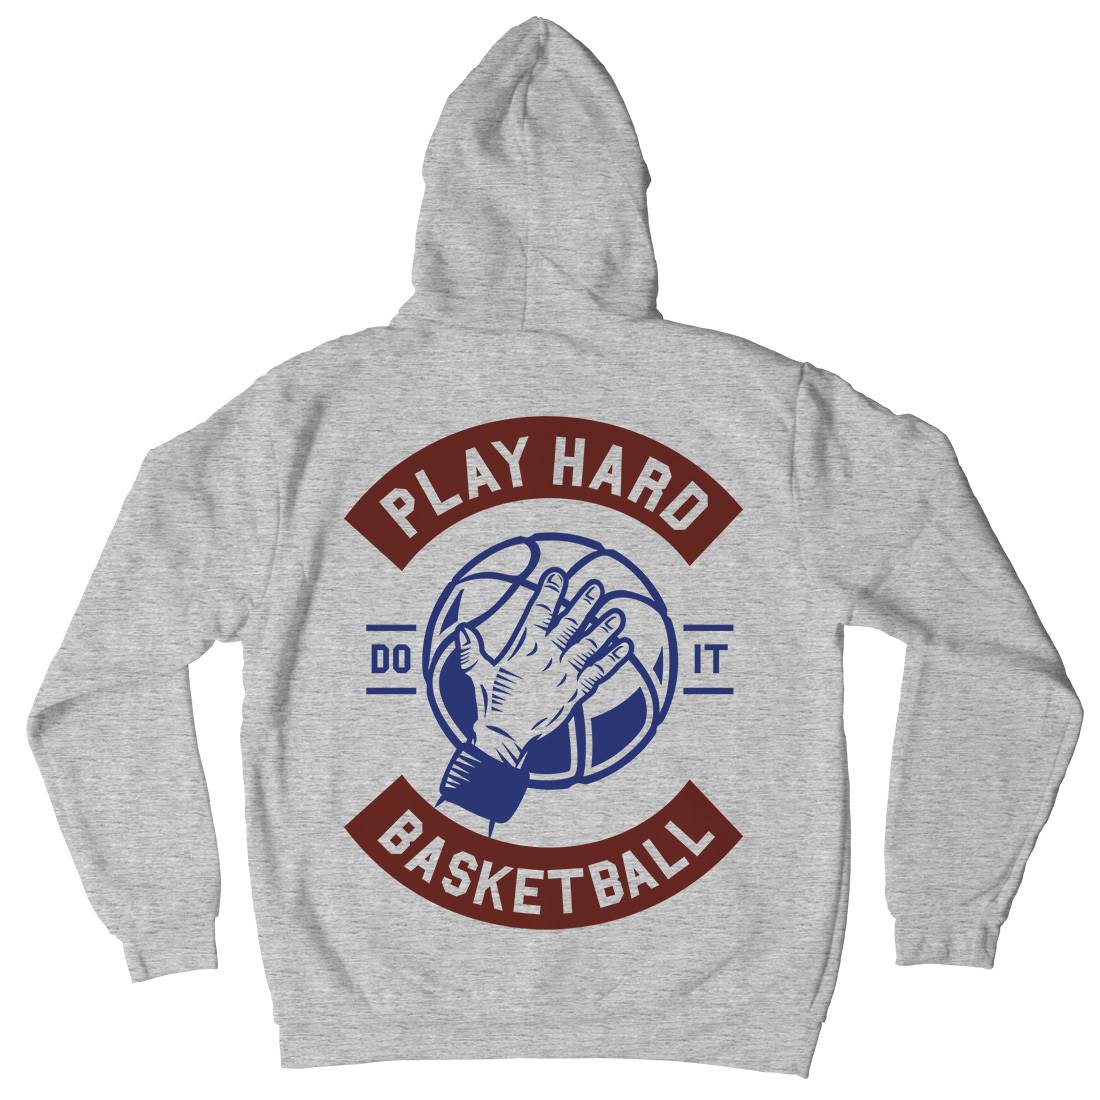 Play Hard Basketball Mens Hoodie With Pocket Sport A261